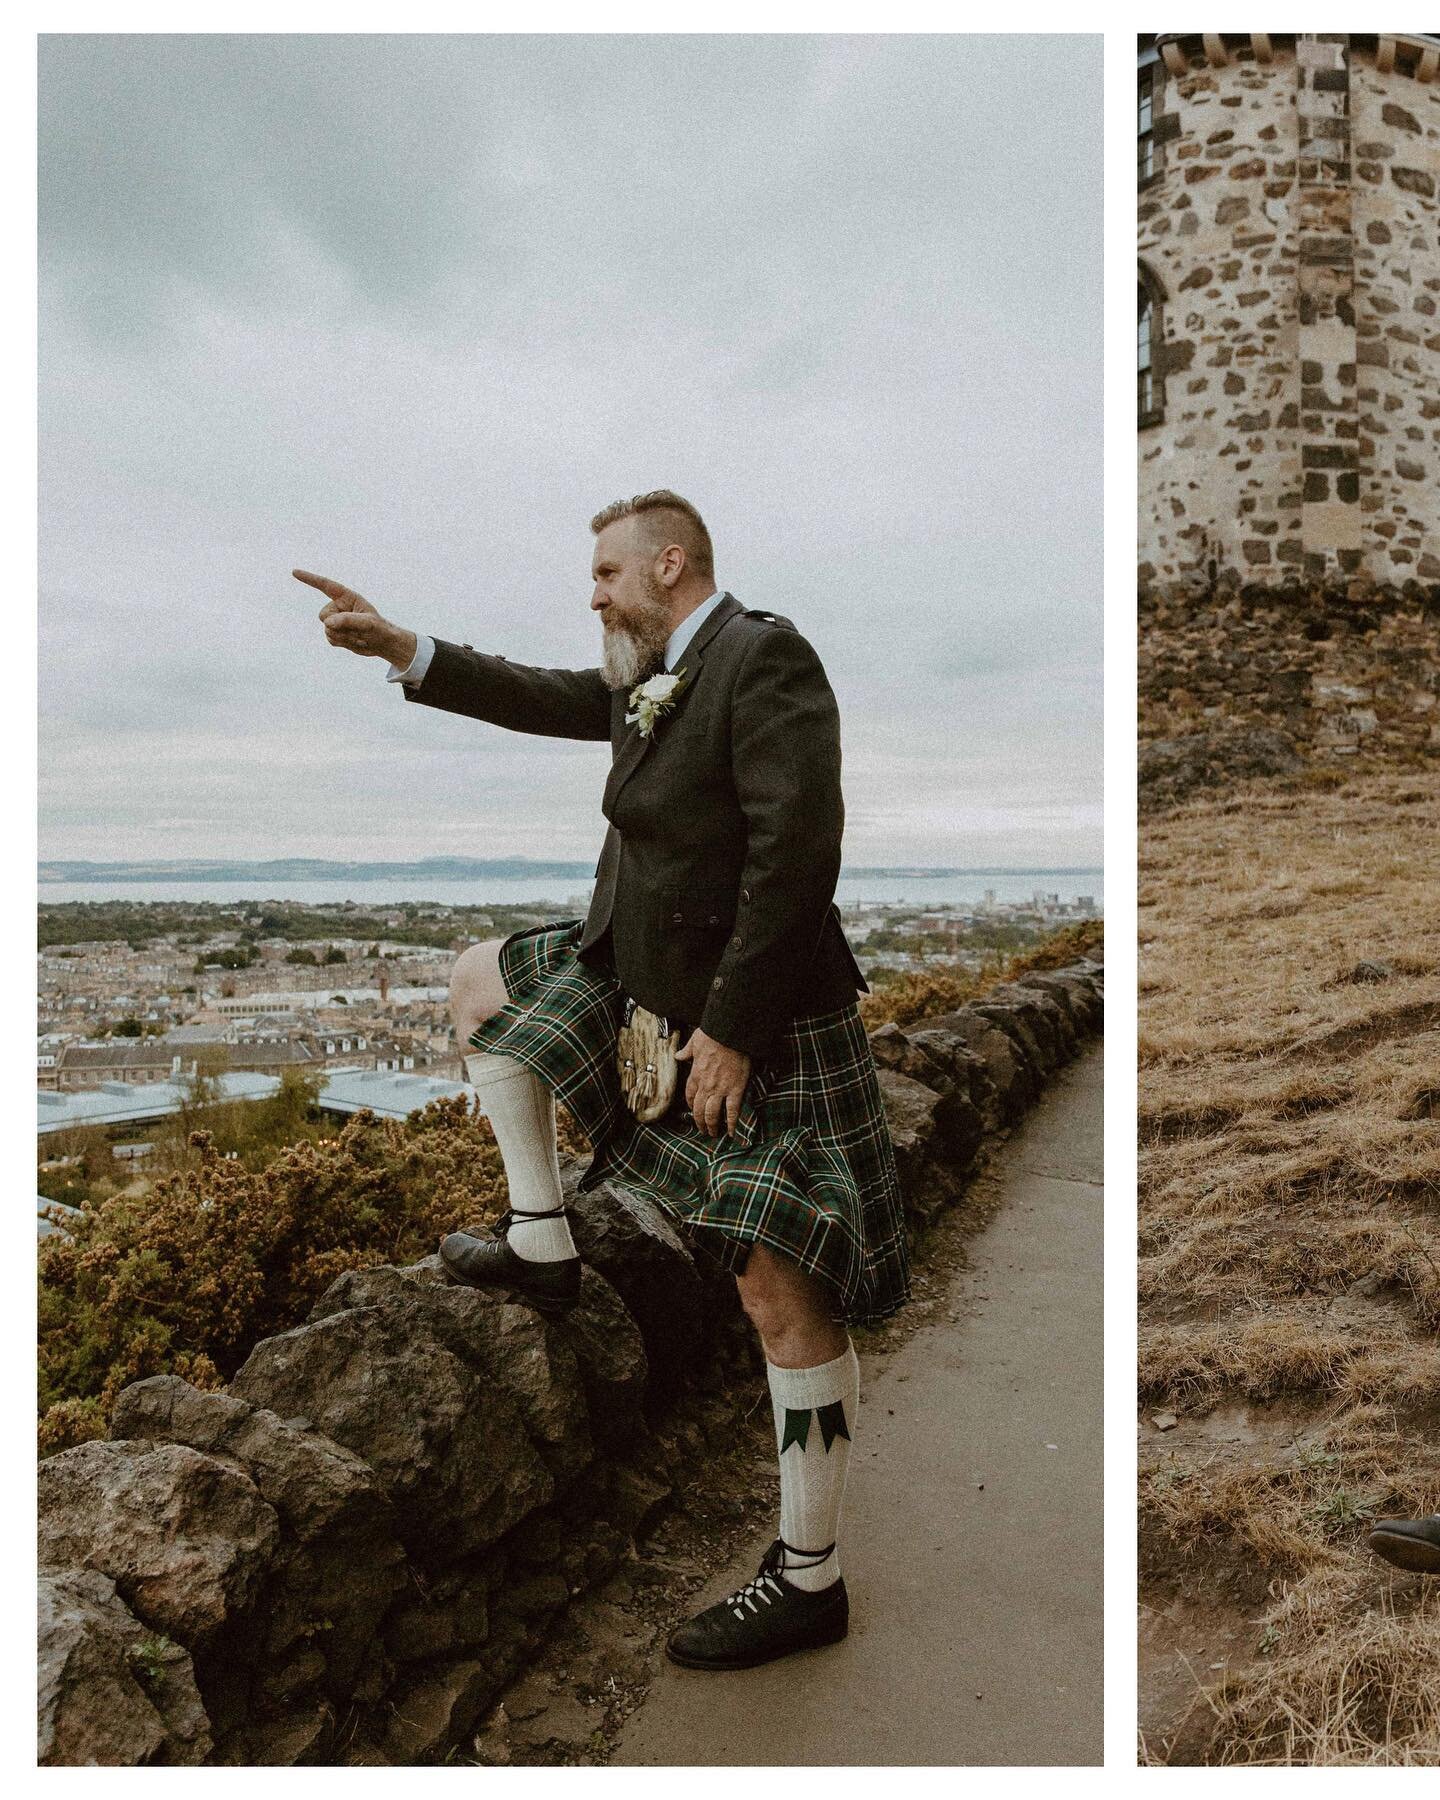 If you get married in Scotland, you need to immediately make @andrewdscottcelebrant your celebrant. Easily the most hilarious and charismatic person you&rsquo;ll ever meet, and his personality is bigger than life! He&rsquo;s also 6&rsquo;6&rdquo;, so